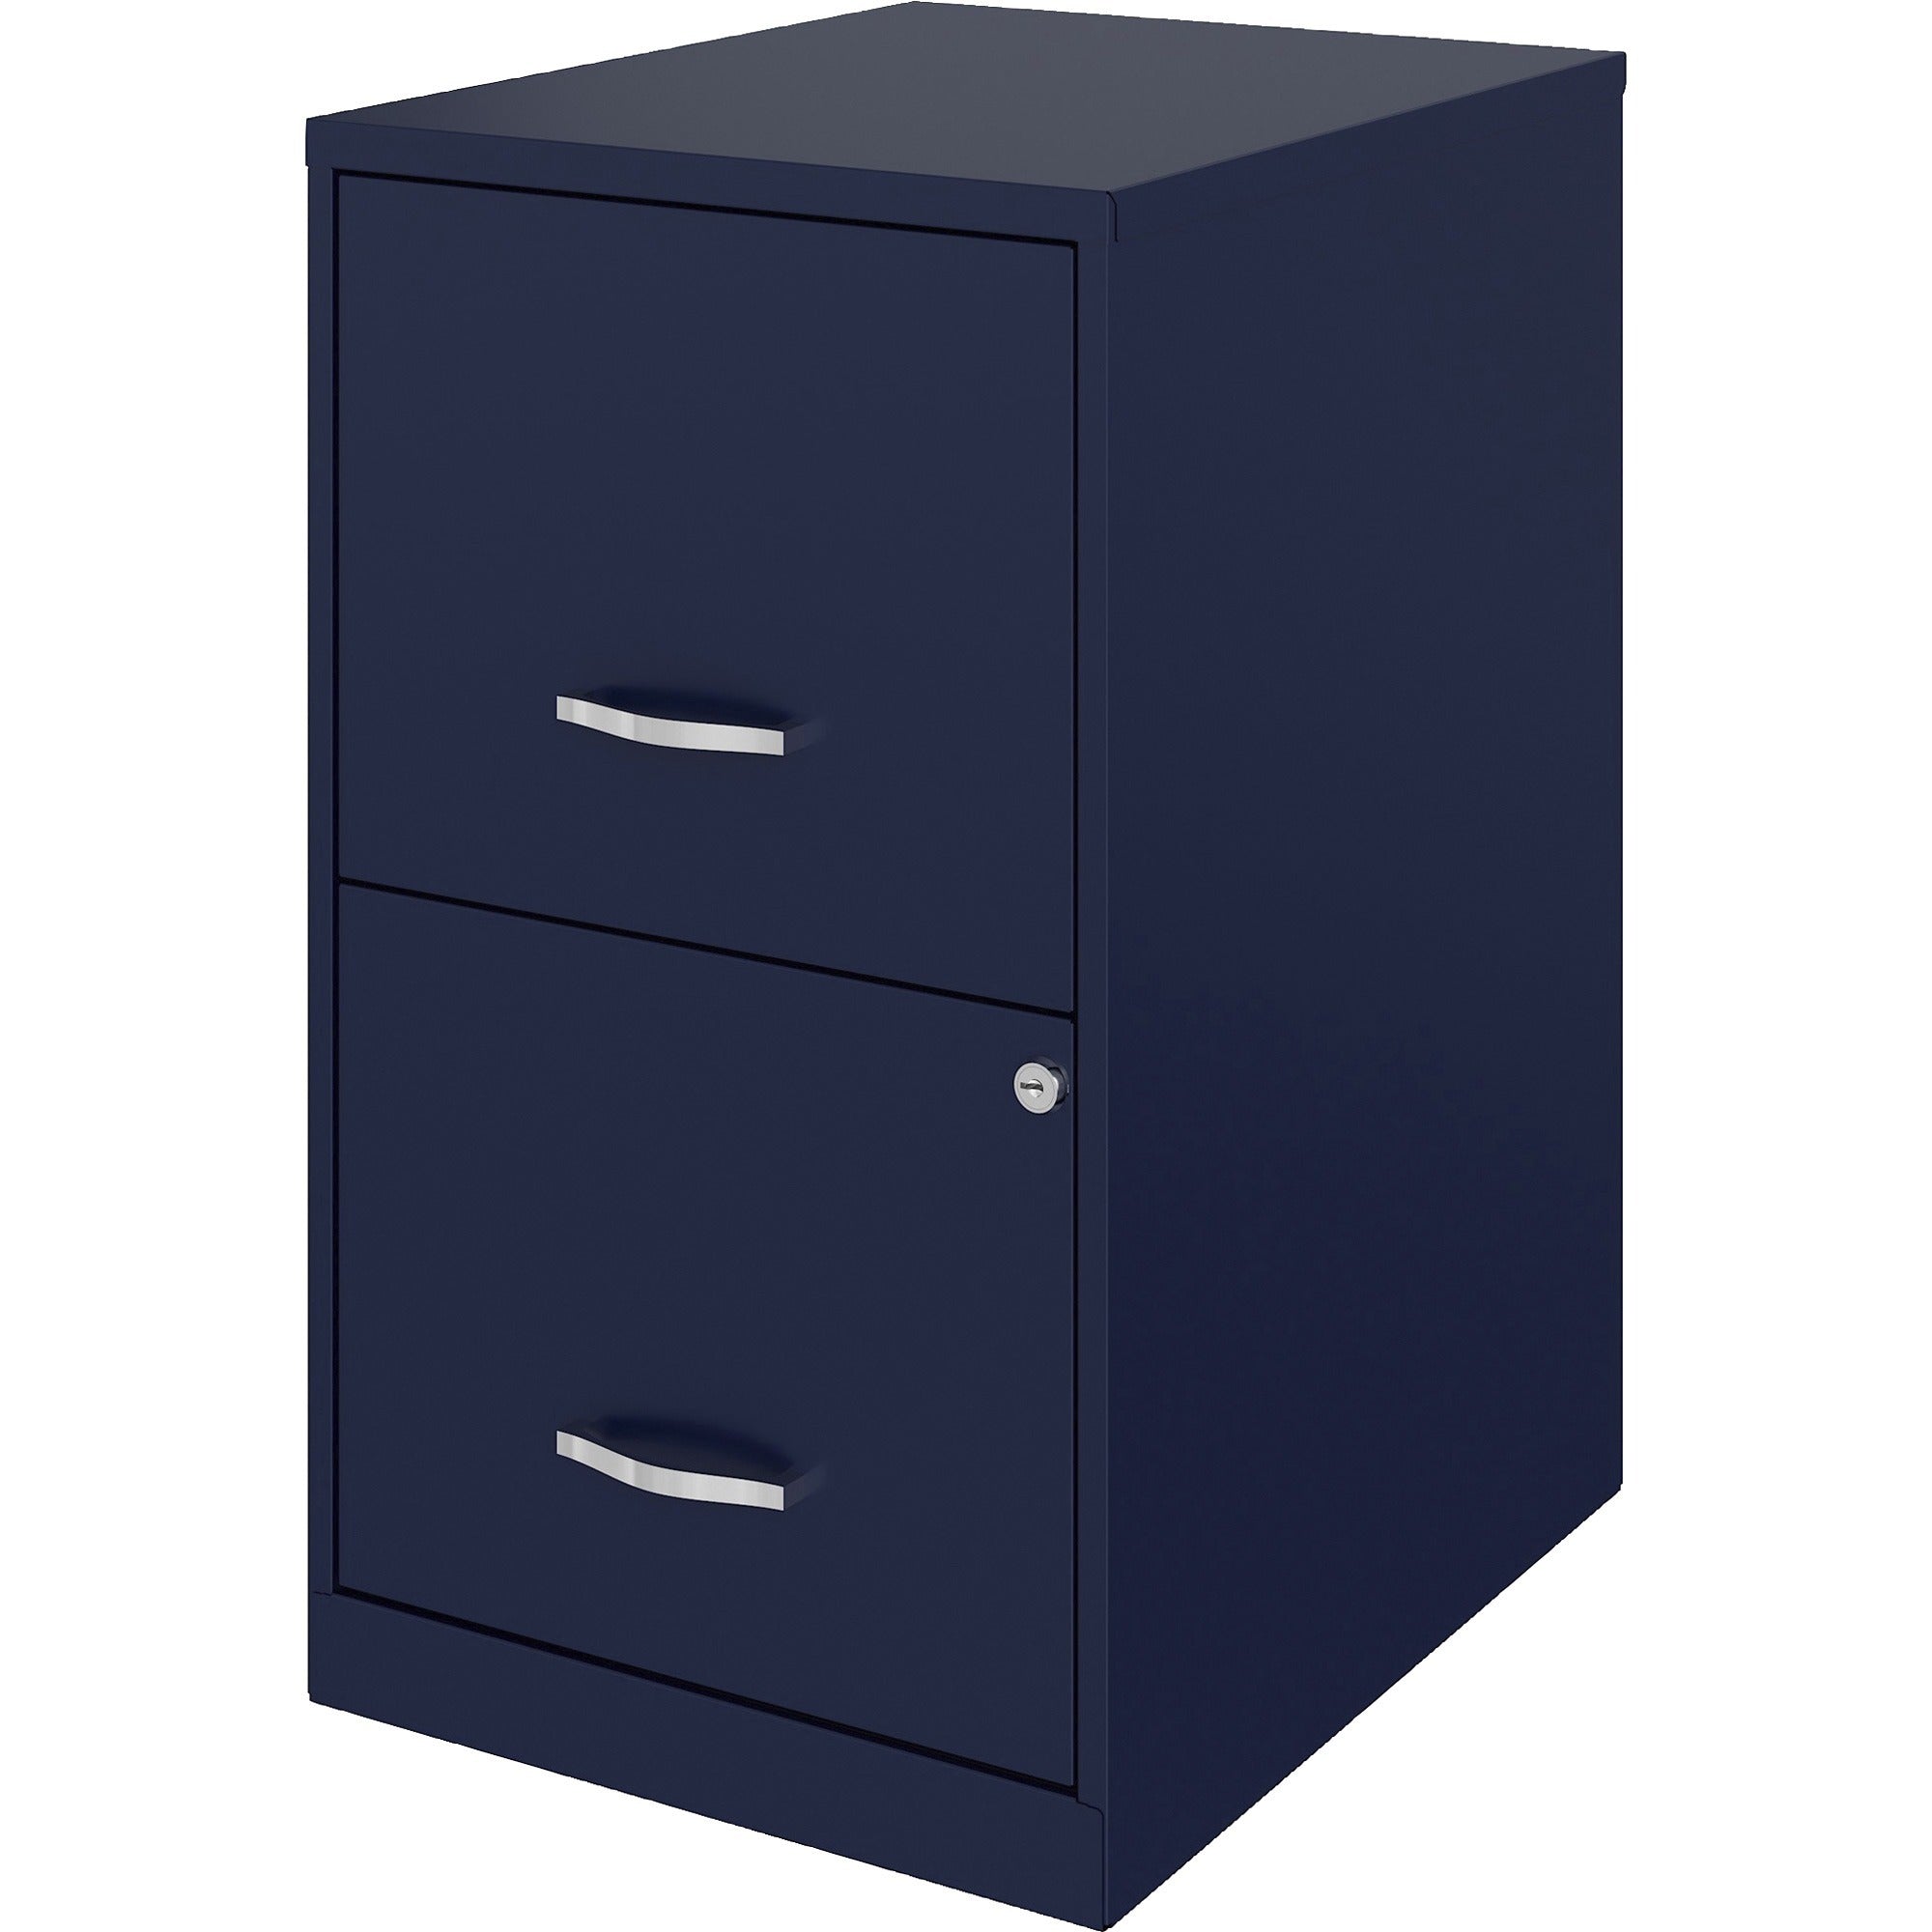 nusparc-file-cabinet-142-x-18-x-245-2-x-drawers-for-file-letter-vertical-locking-drawer-glide-suspension-nonporous-surface-blue-baked-enamel-steel-recycled_nprvf218aany - 3